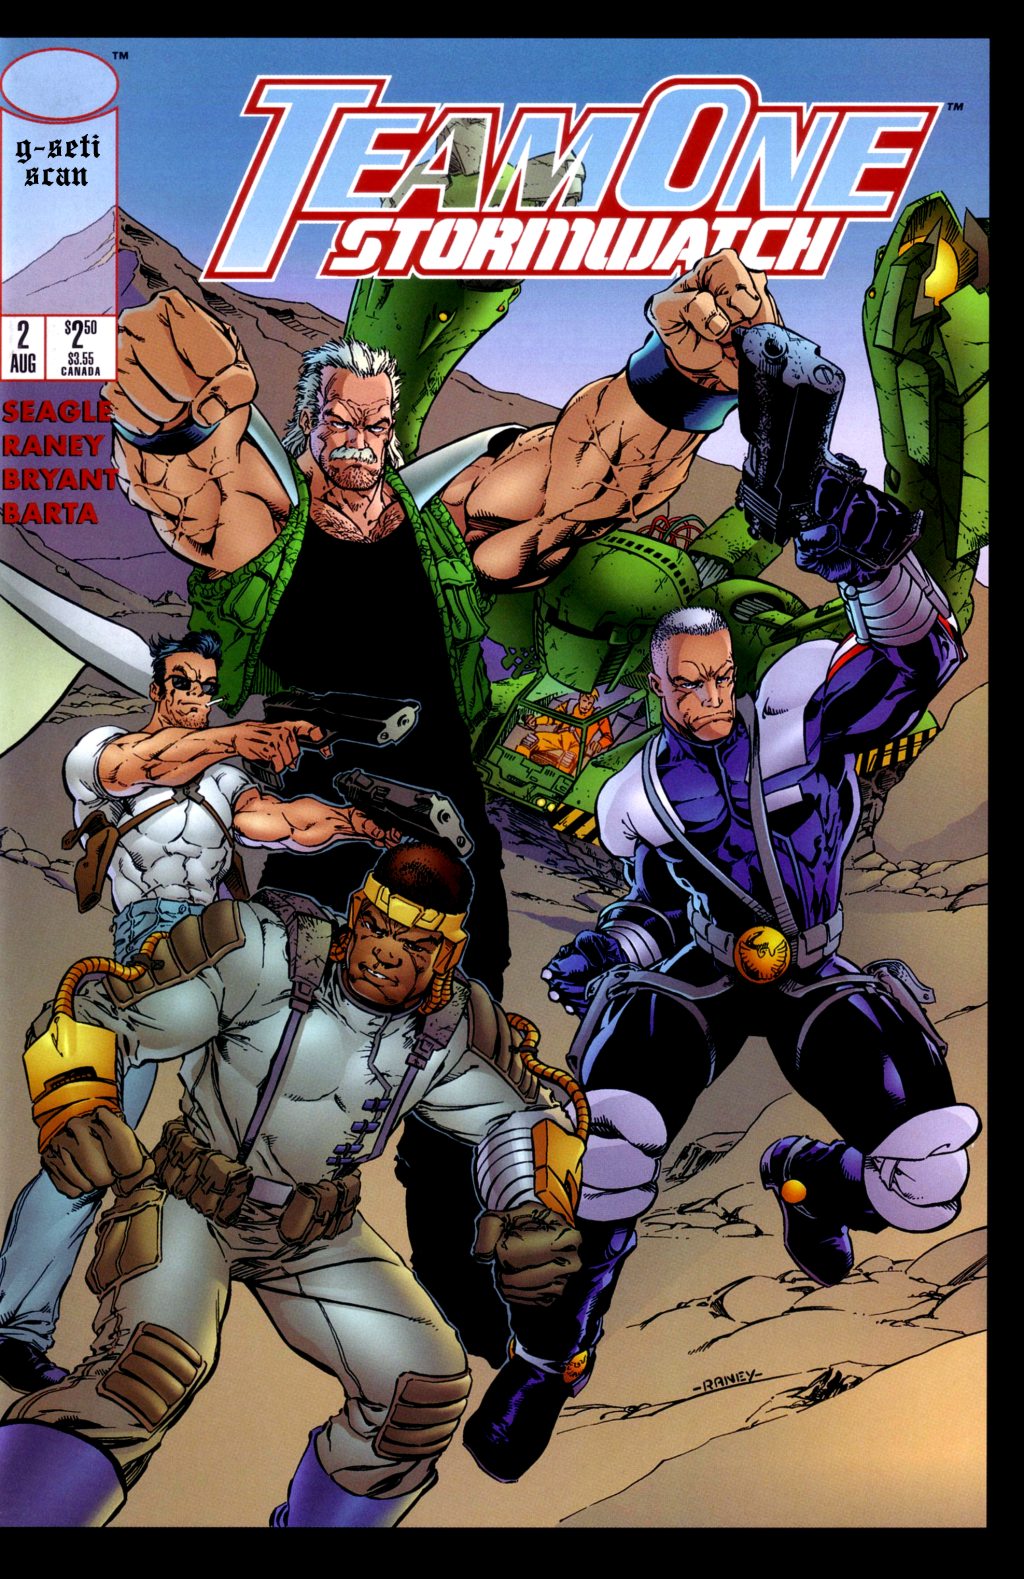 Read online Team One: Stormwatch comic -  Issue #2 - 1